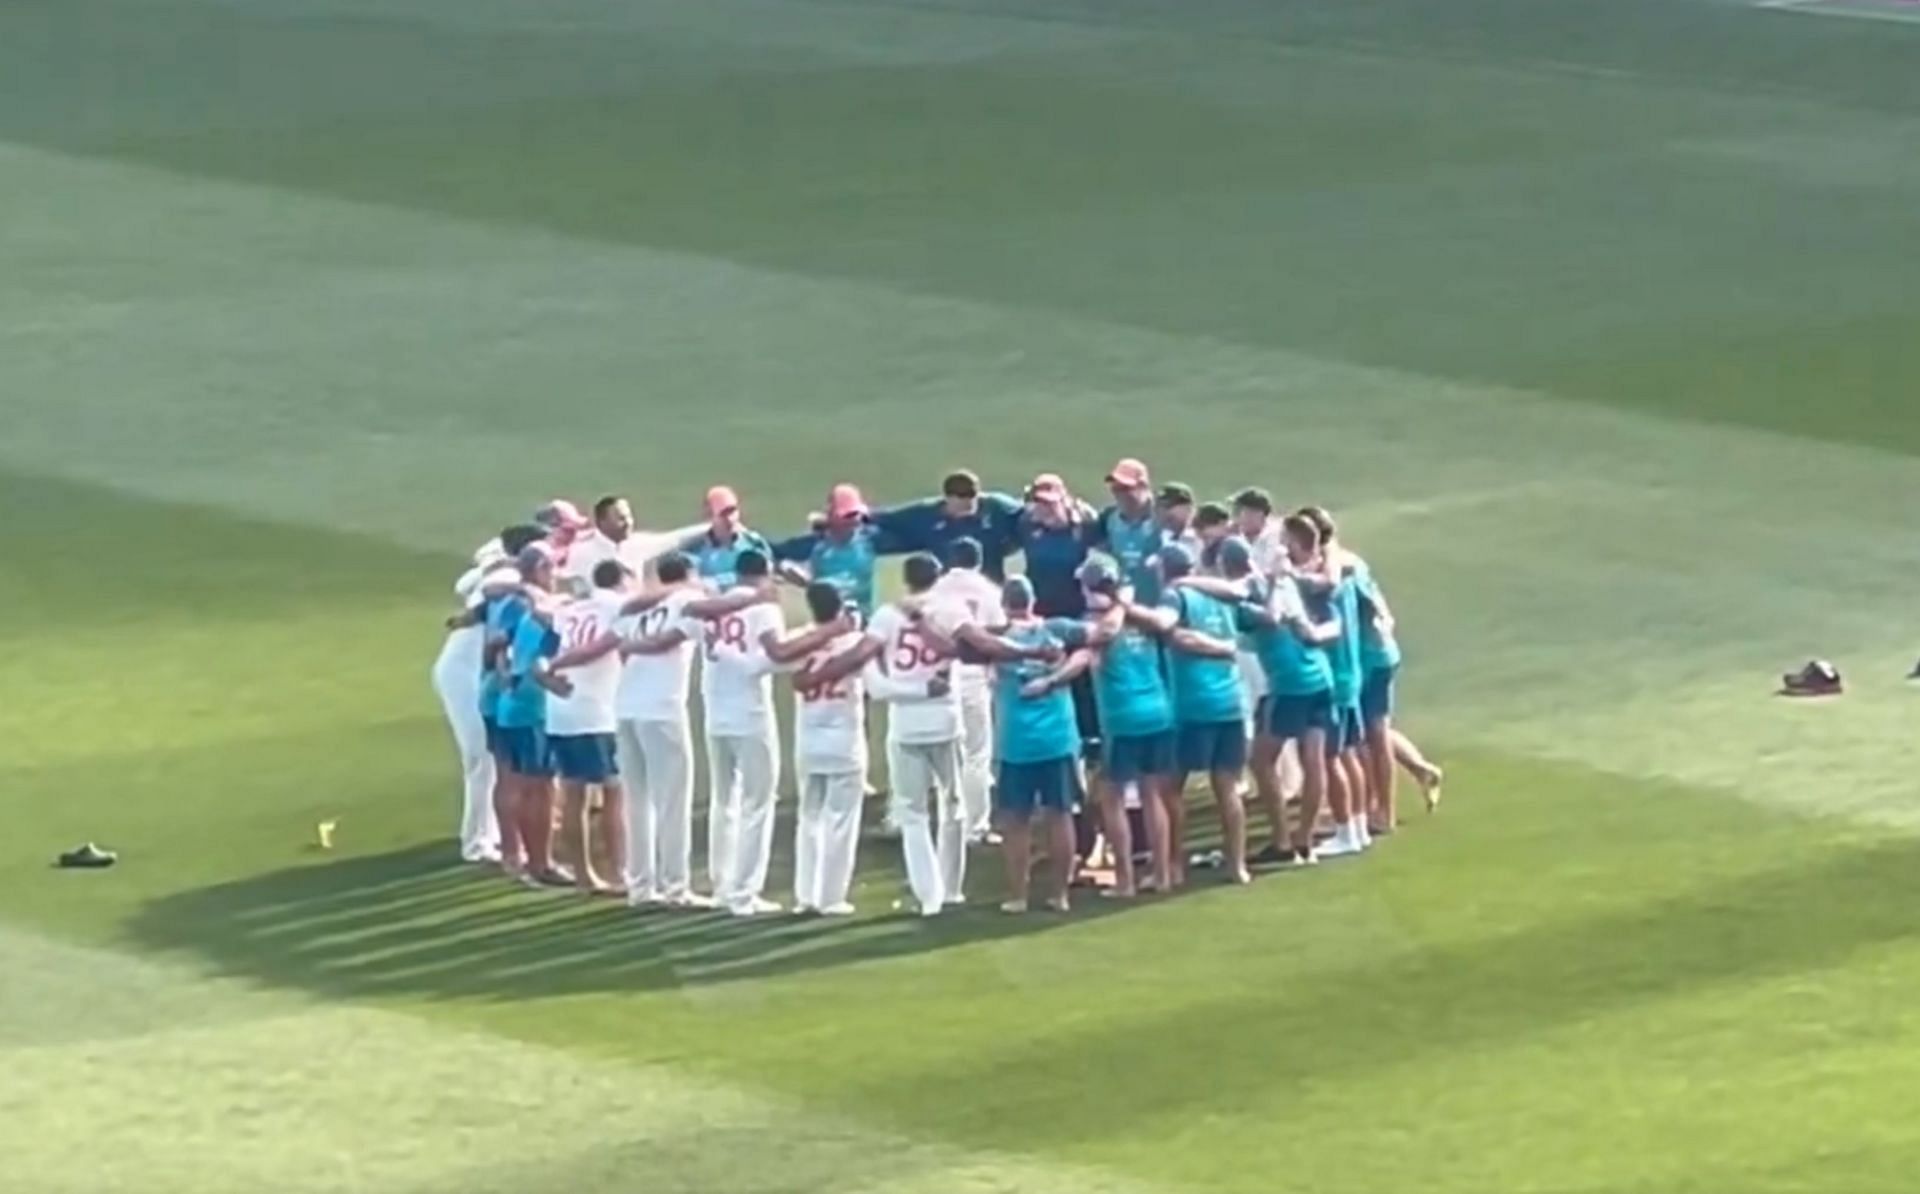 David Warner leading the team song for Australia after the win at SCG. 